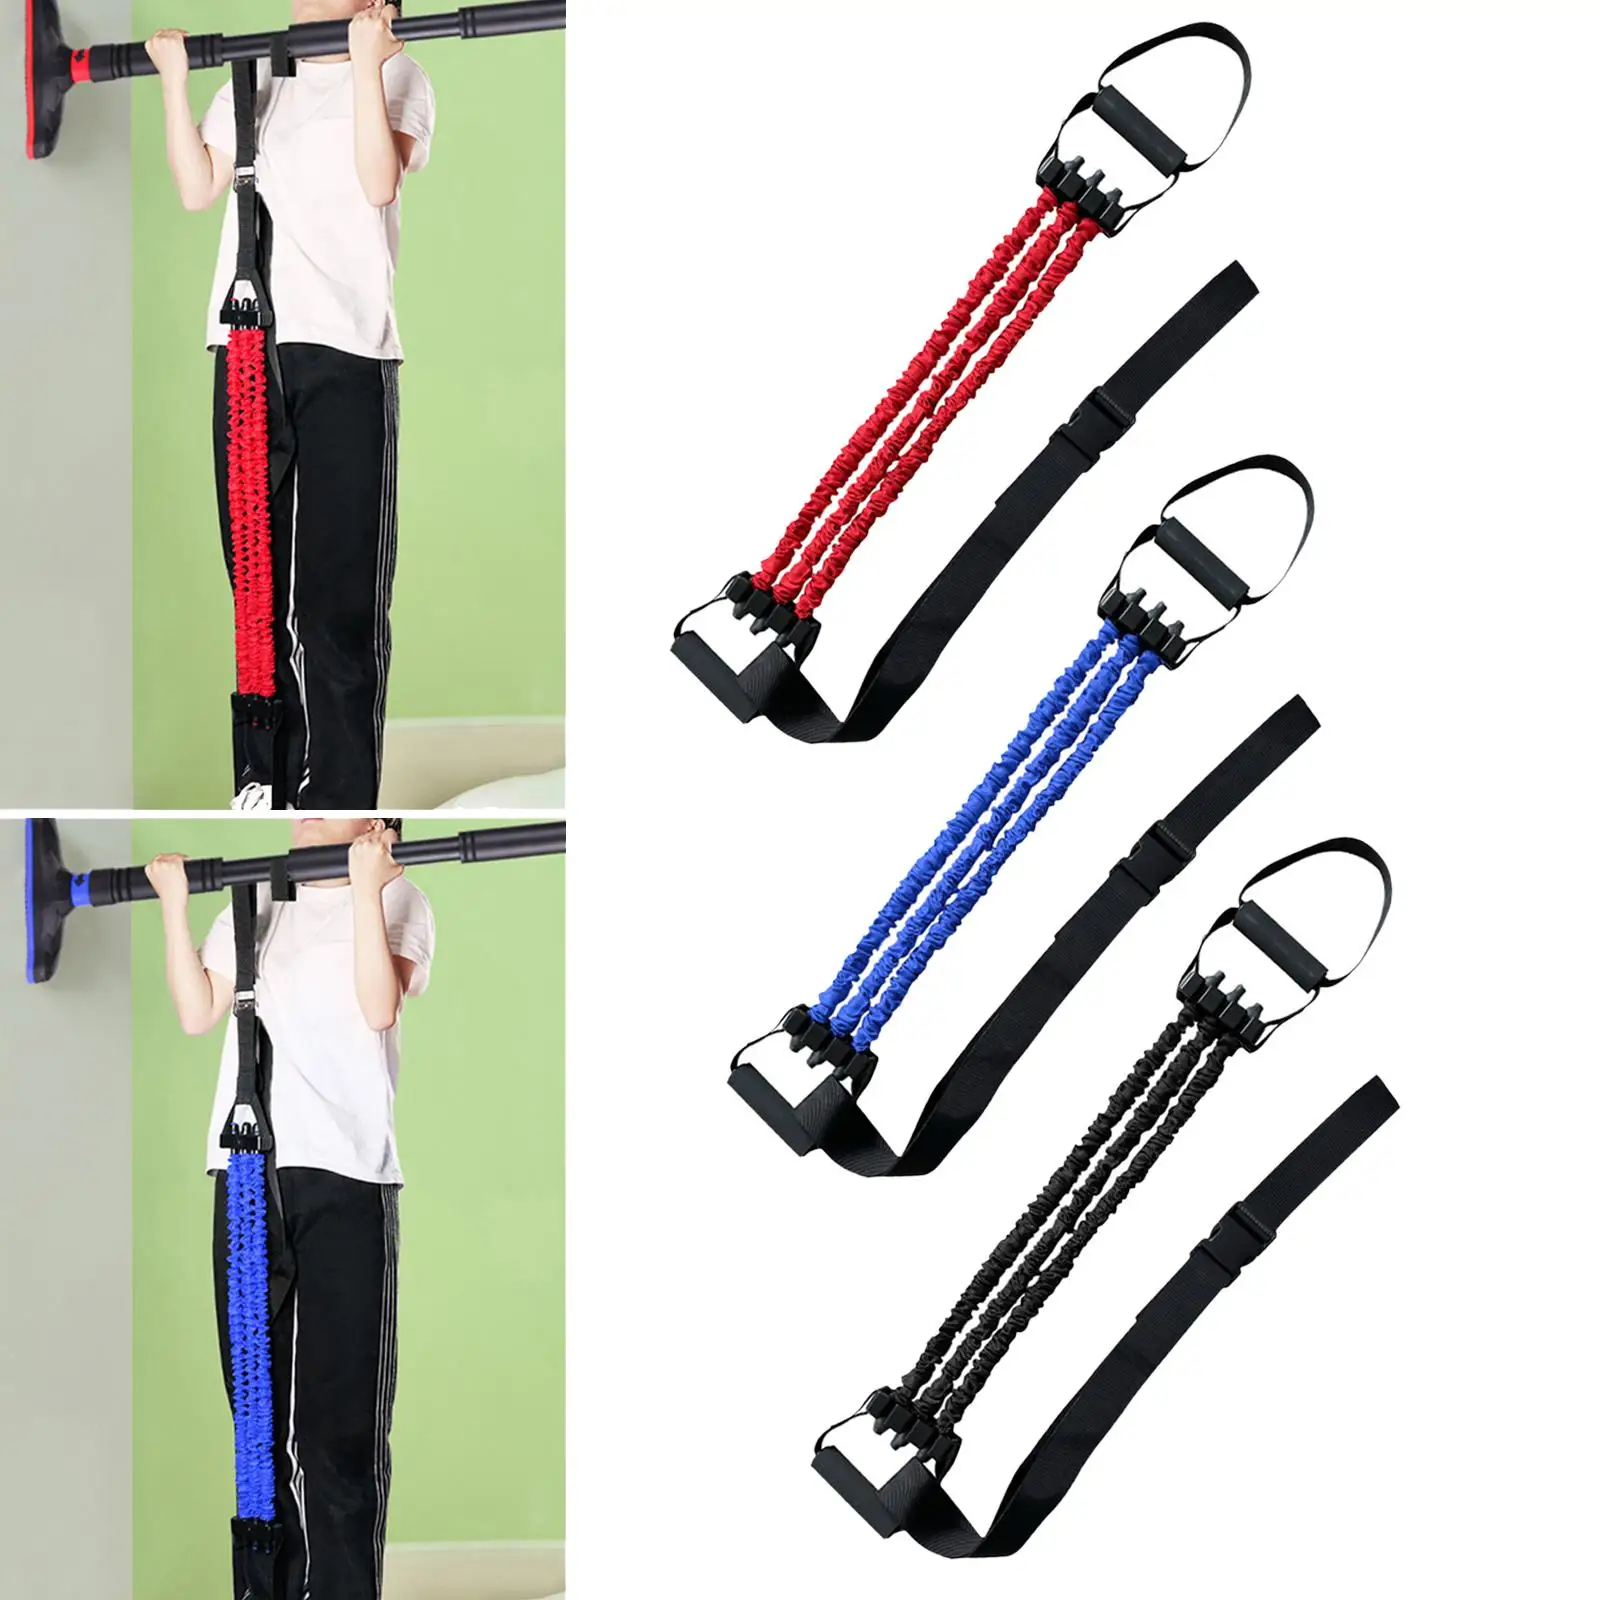 Advanced Arm Strength Resistance Bands for Weight Training and Fitness